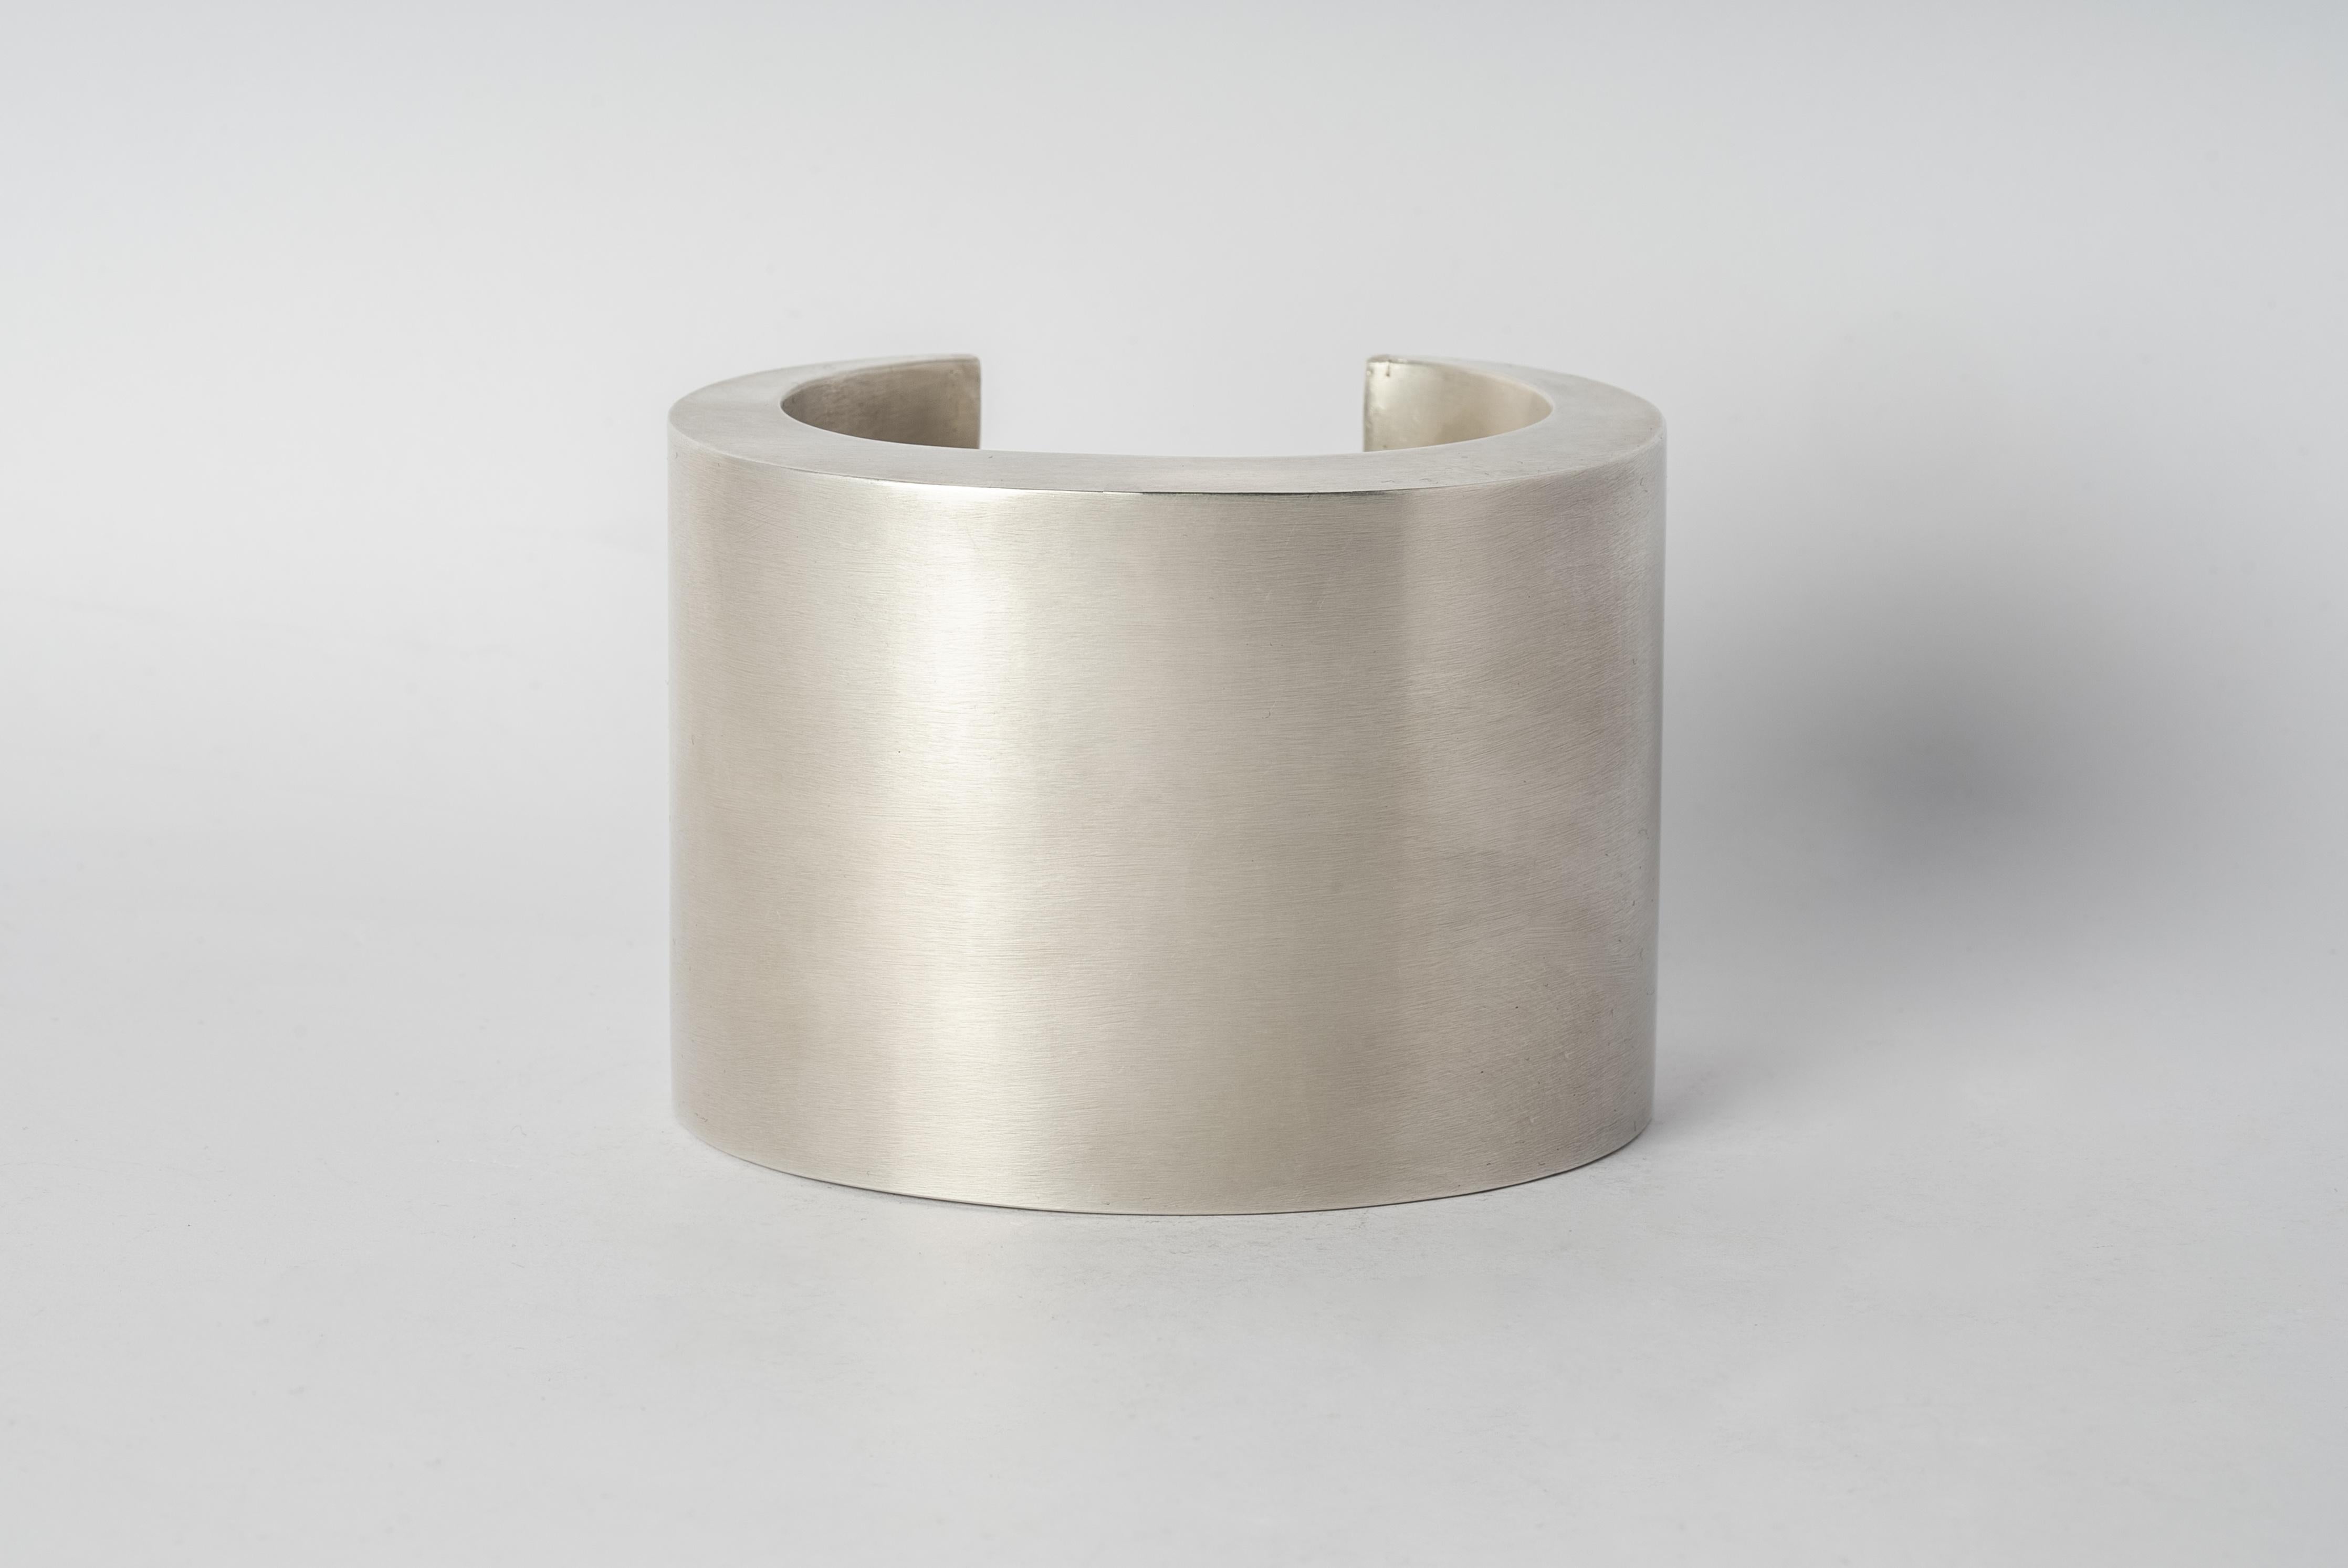 Bracelet in brass. Brass substrate is electroplated with silver and then dipped into acid to create the subtly destroyed surface. This piece is 100% hand fabricated from metal plate; cut into sections and soldered together to make the hollow three